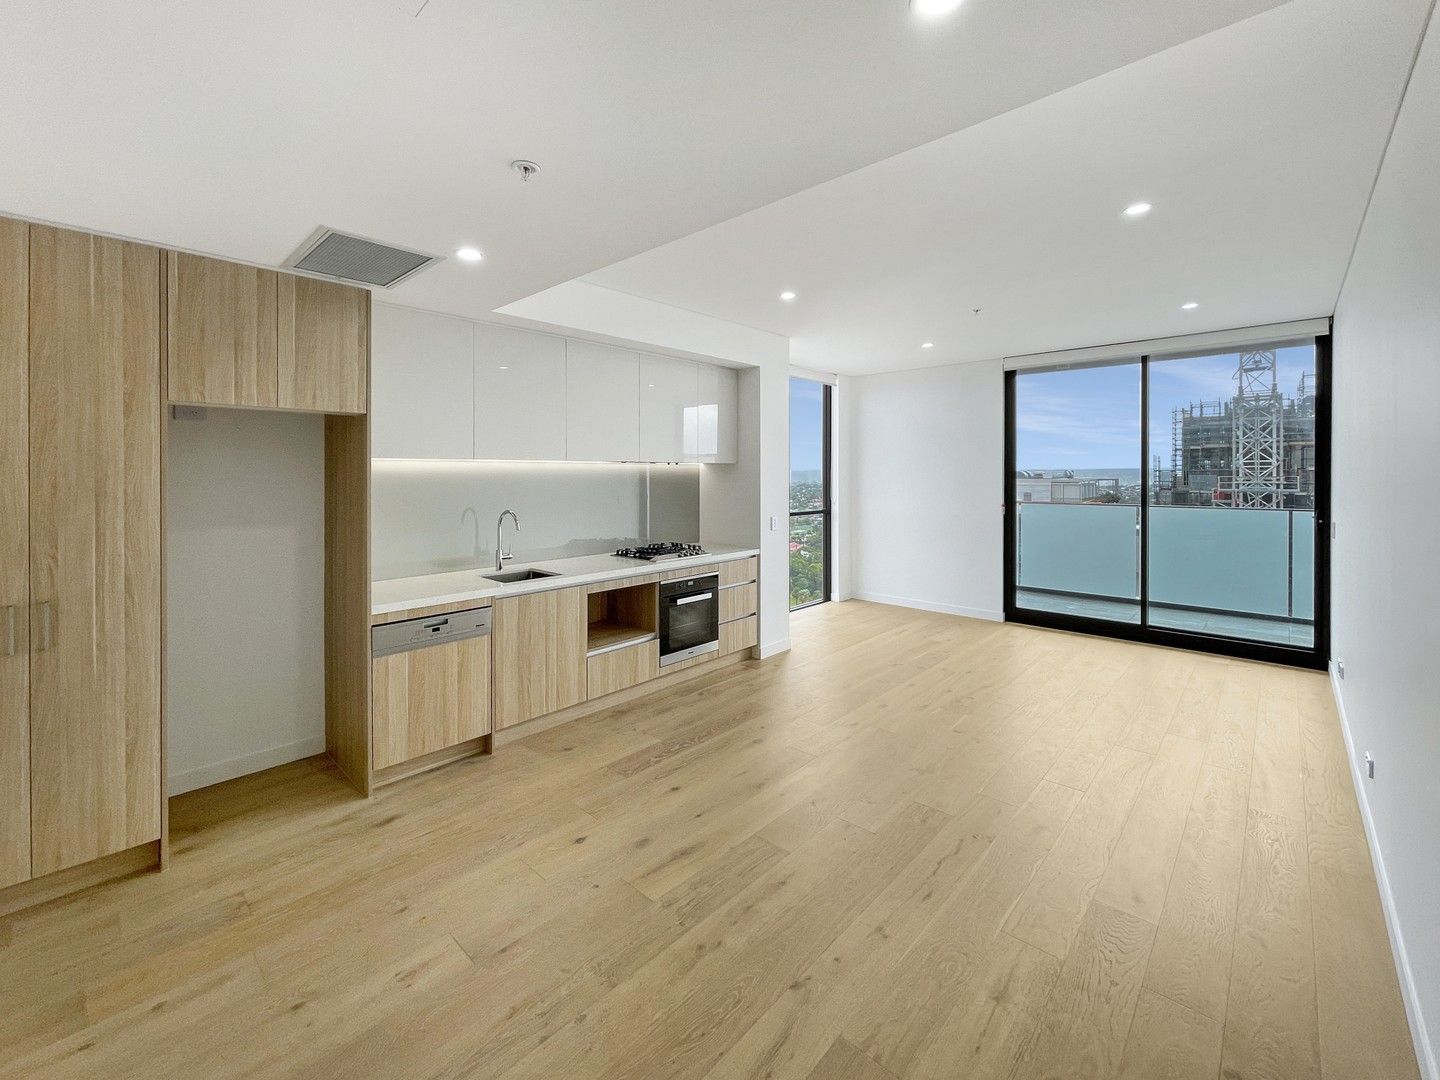 2 bedrooms Apartment / Unit / Flat in 2701/7 Deane Street BURWOOD NSW, 2134